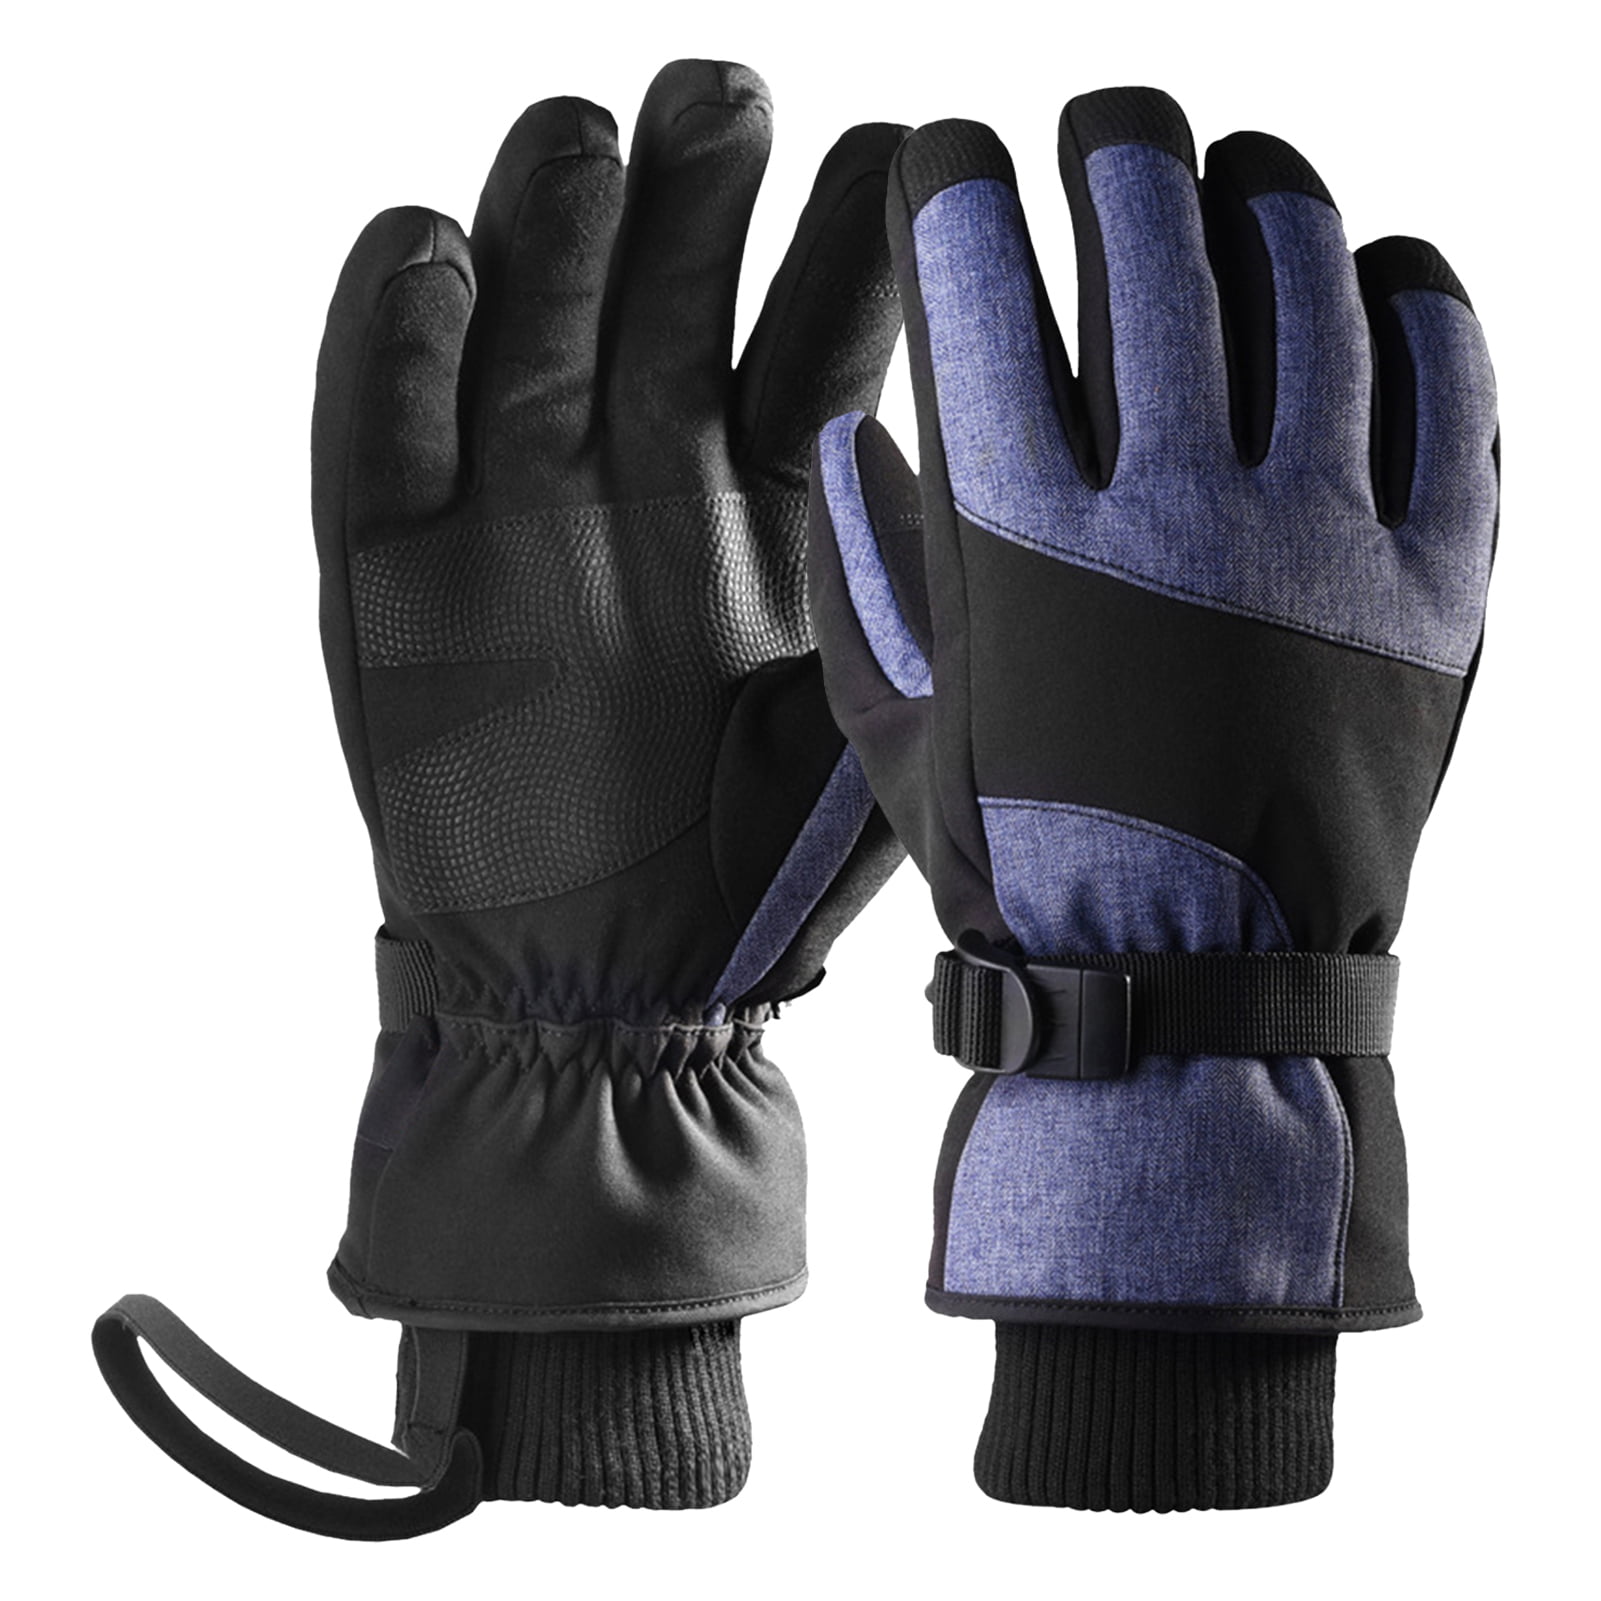 Details about   Winter Skiing Gloves Touch Screen Soprt Snowboarding Waterproof Thermal Warm 